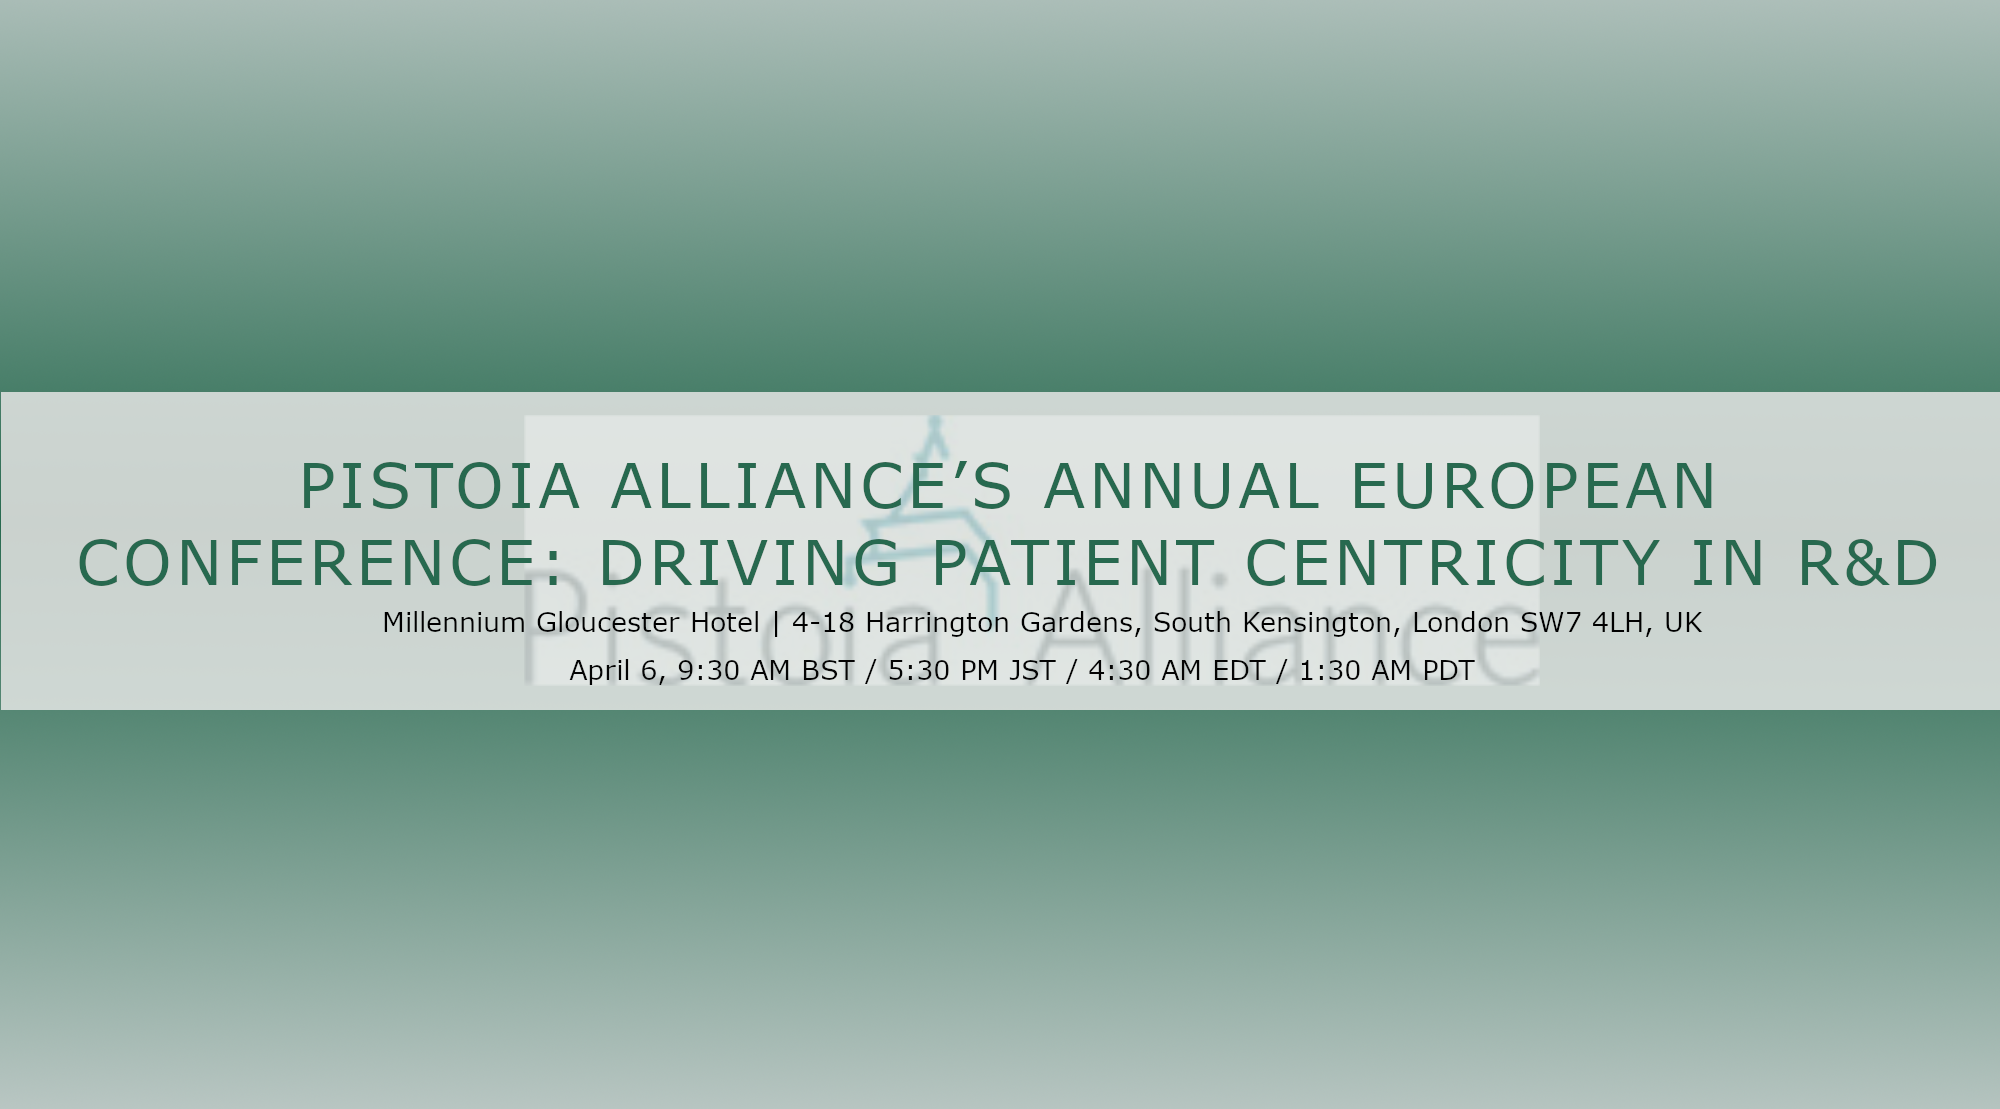 PISTOIA ALLIANCE’S ANNUAL EUROPEAN CONFERENCE: DRIVING PATIENT CENTRICITY IN R&D